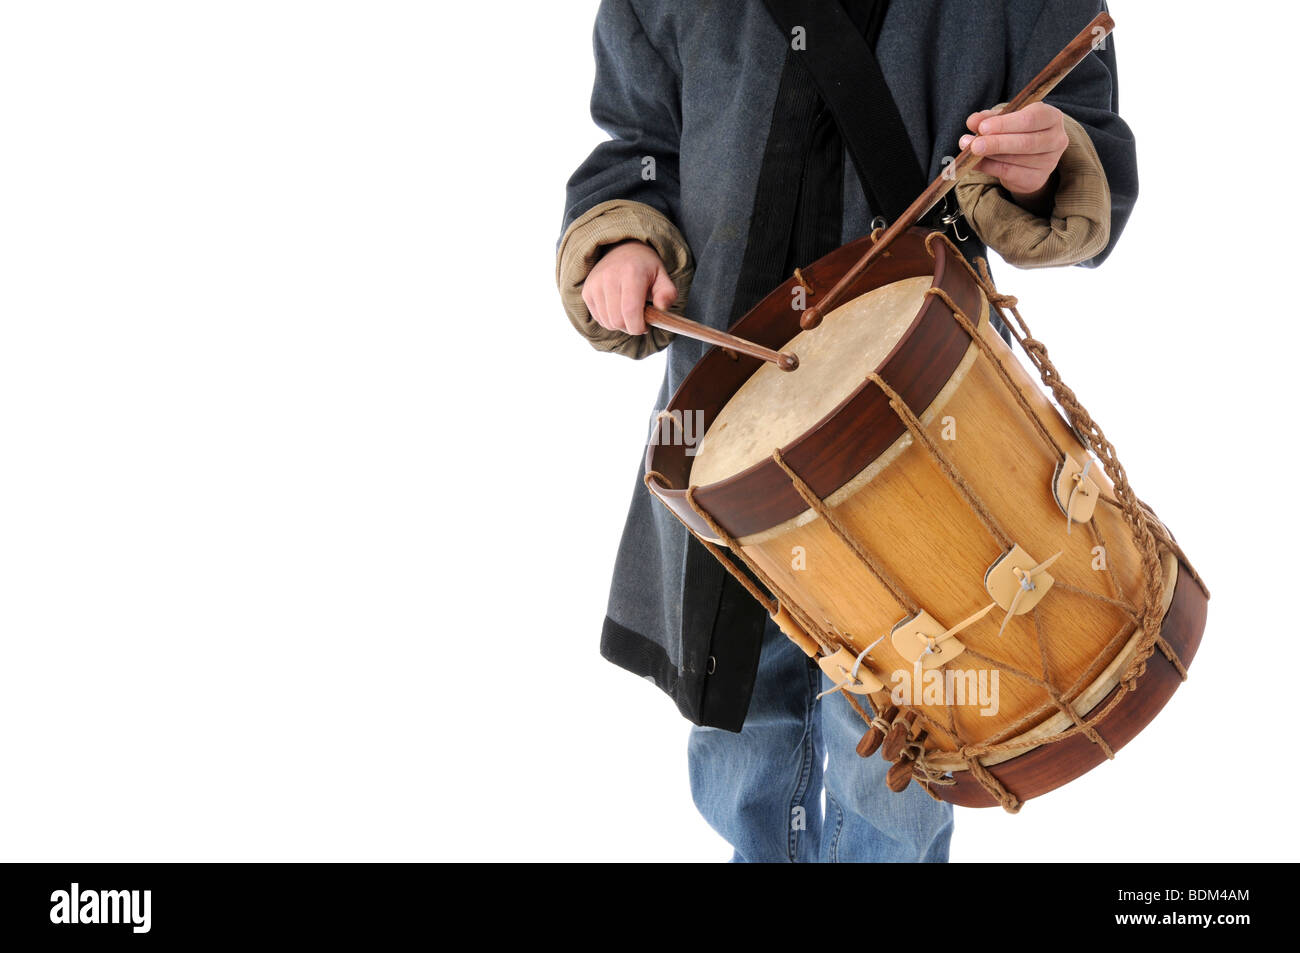 Drummer boy with copyspace isolated over a white background Stock Photo